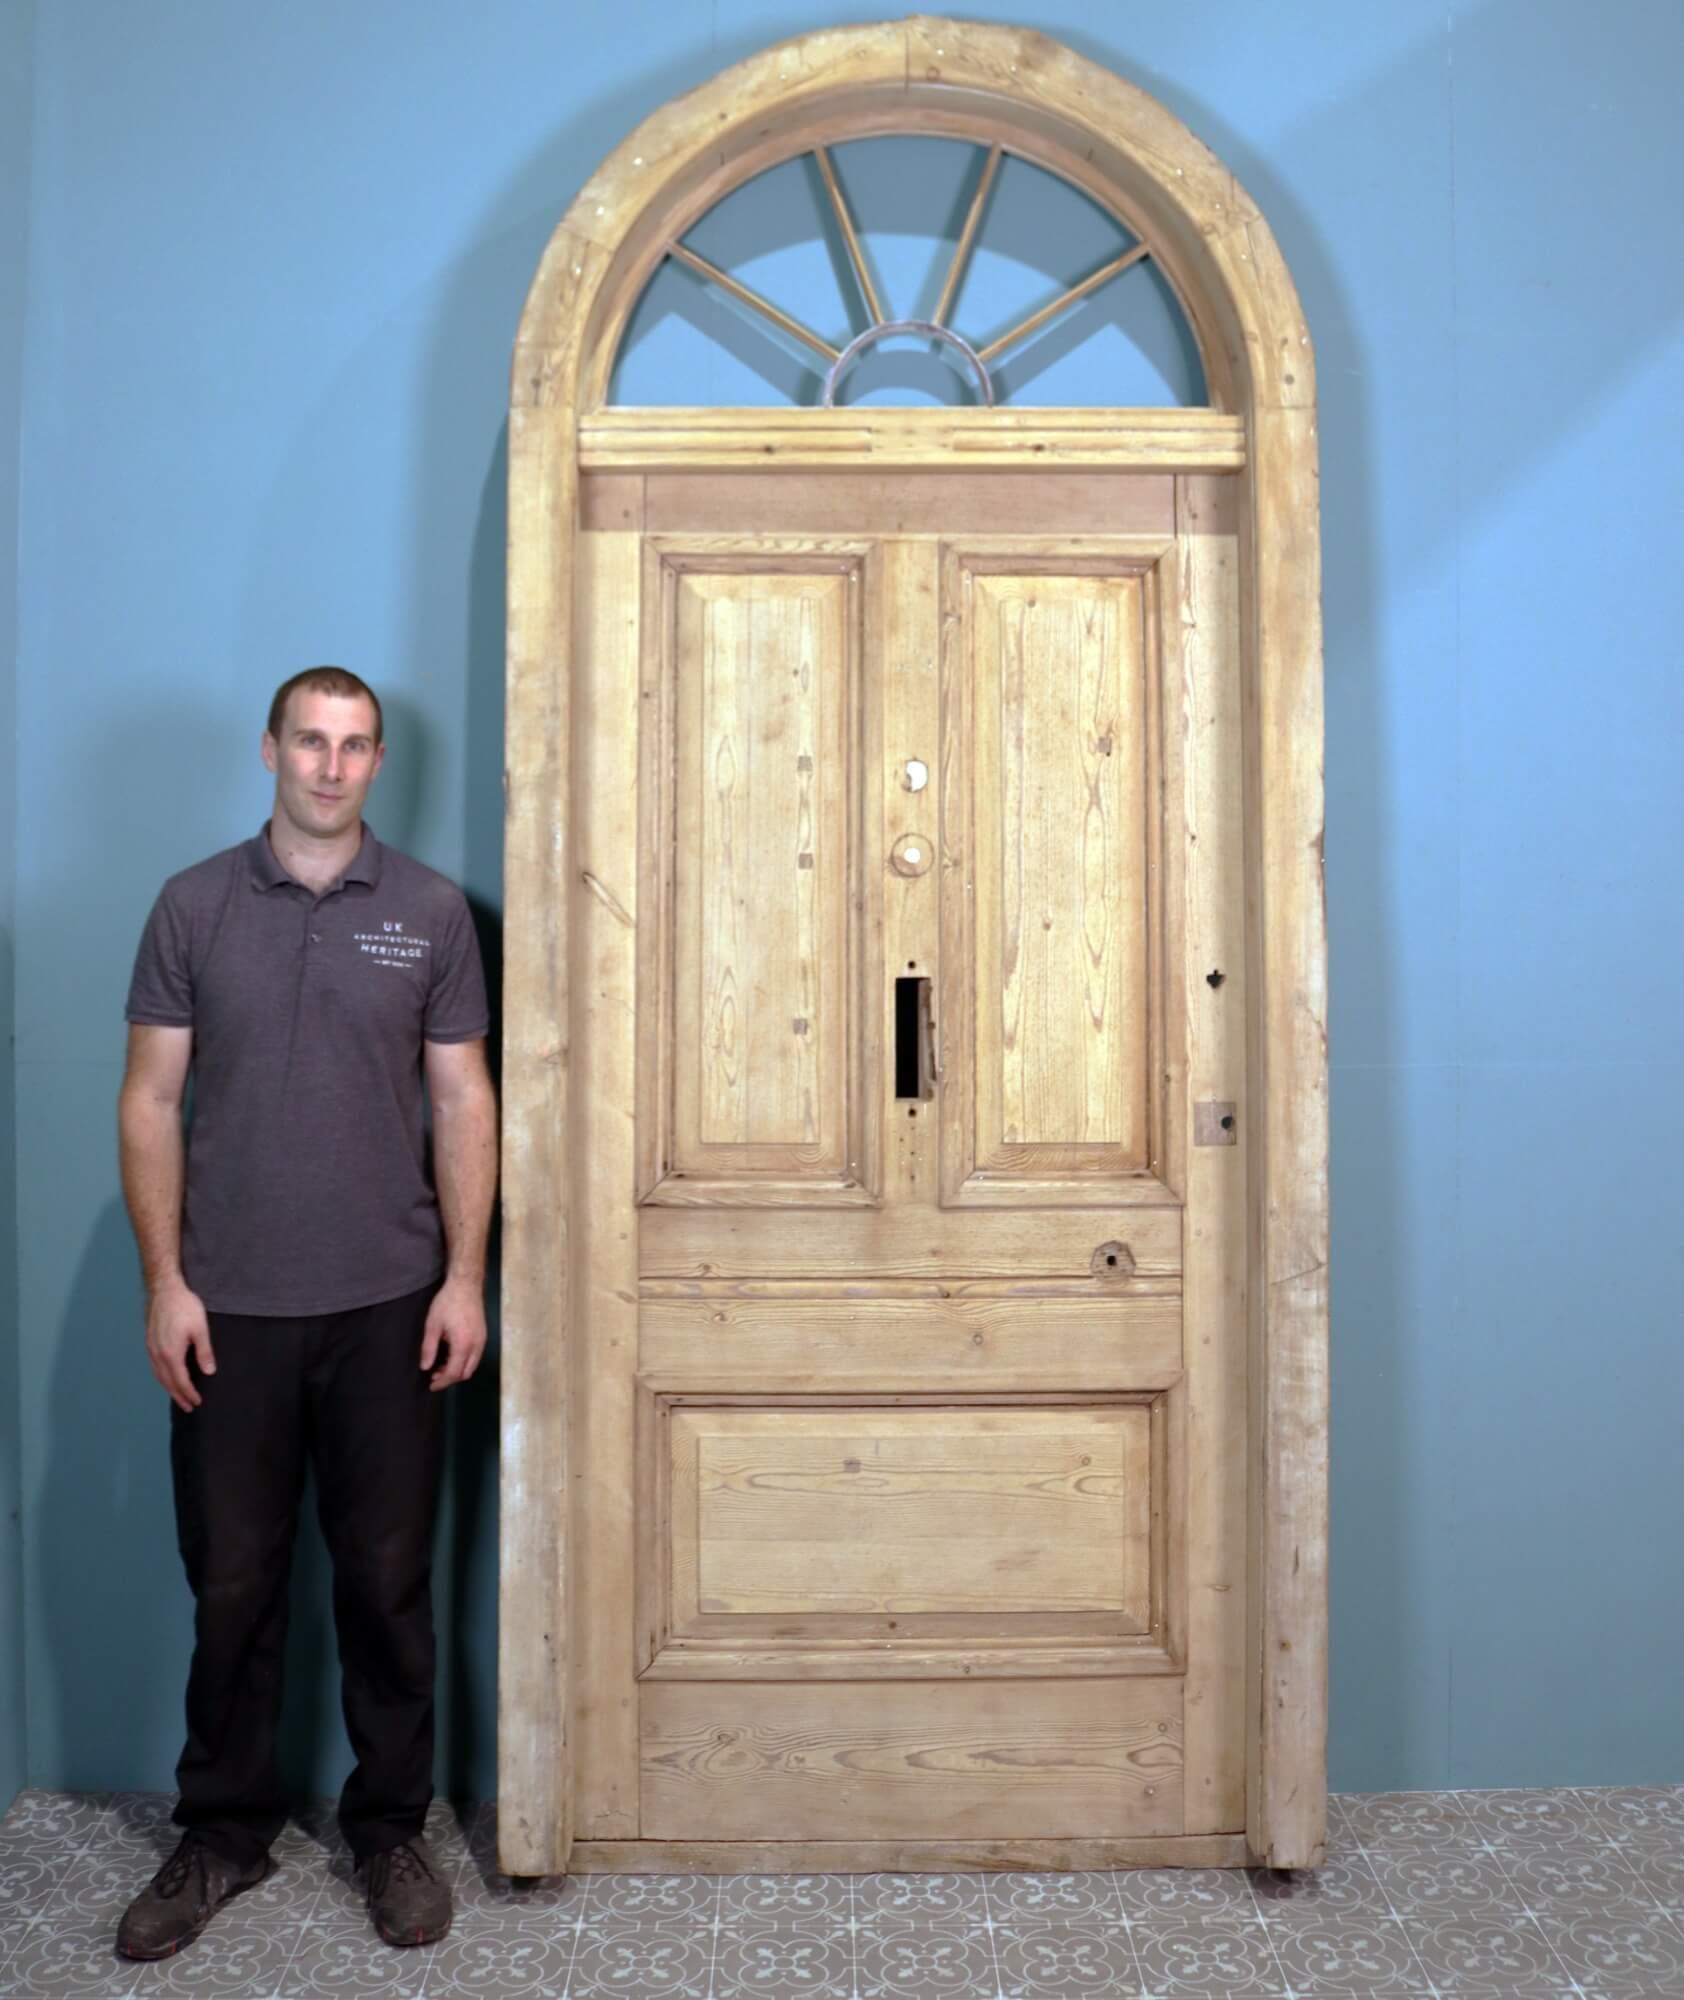 Dating from the late 1800s, this pine front door with fanlight is an excellent example of Georgian architectural style. The arched fanlight top is distinctive of the period, the pine frame and zinc semi-circle once glazed to allow light to cast into